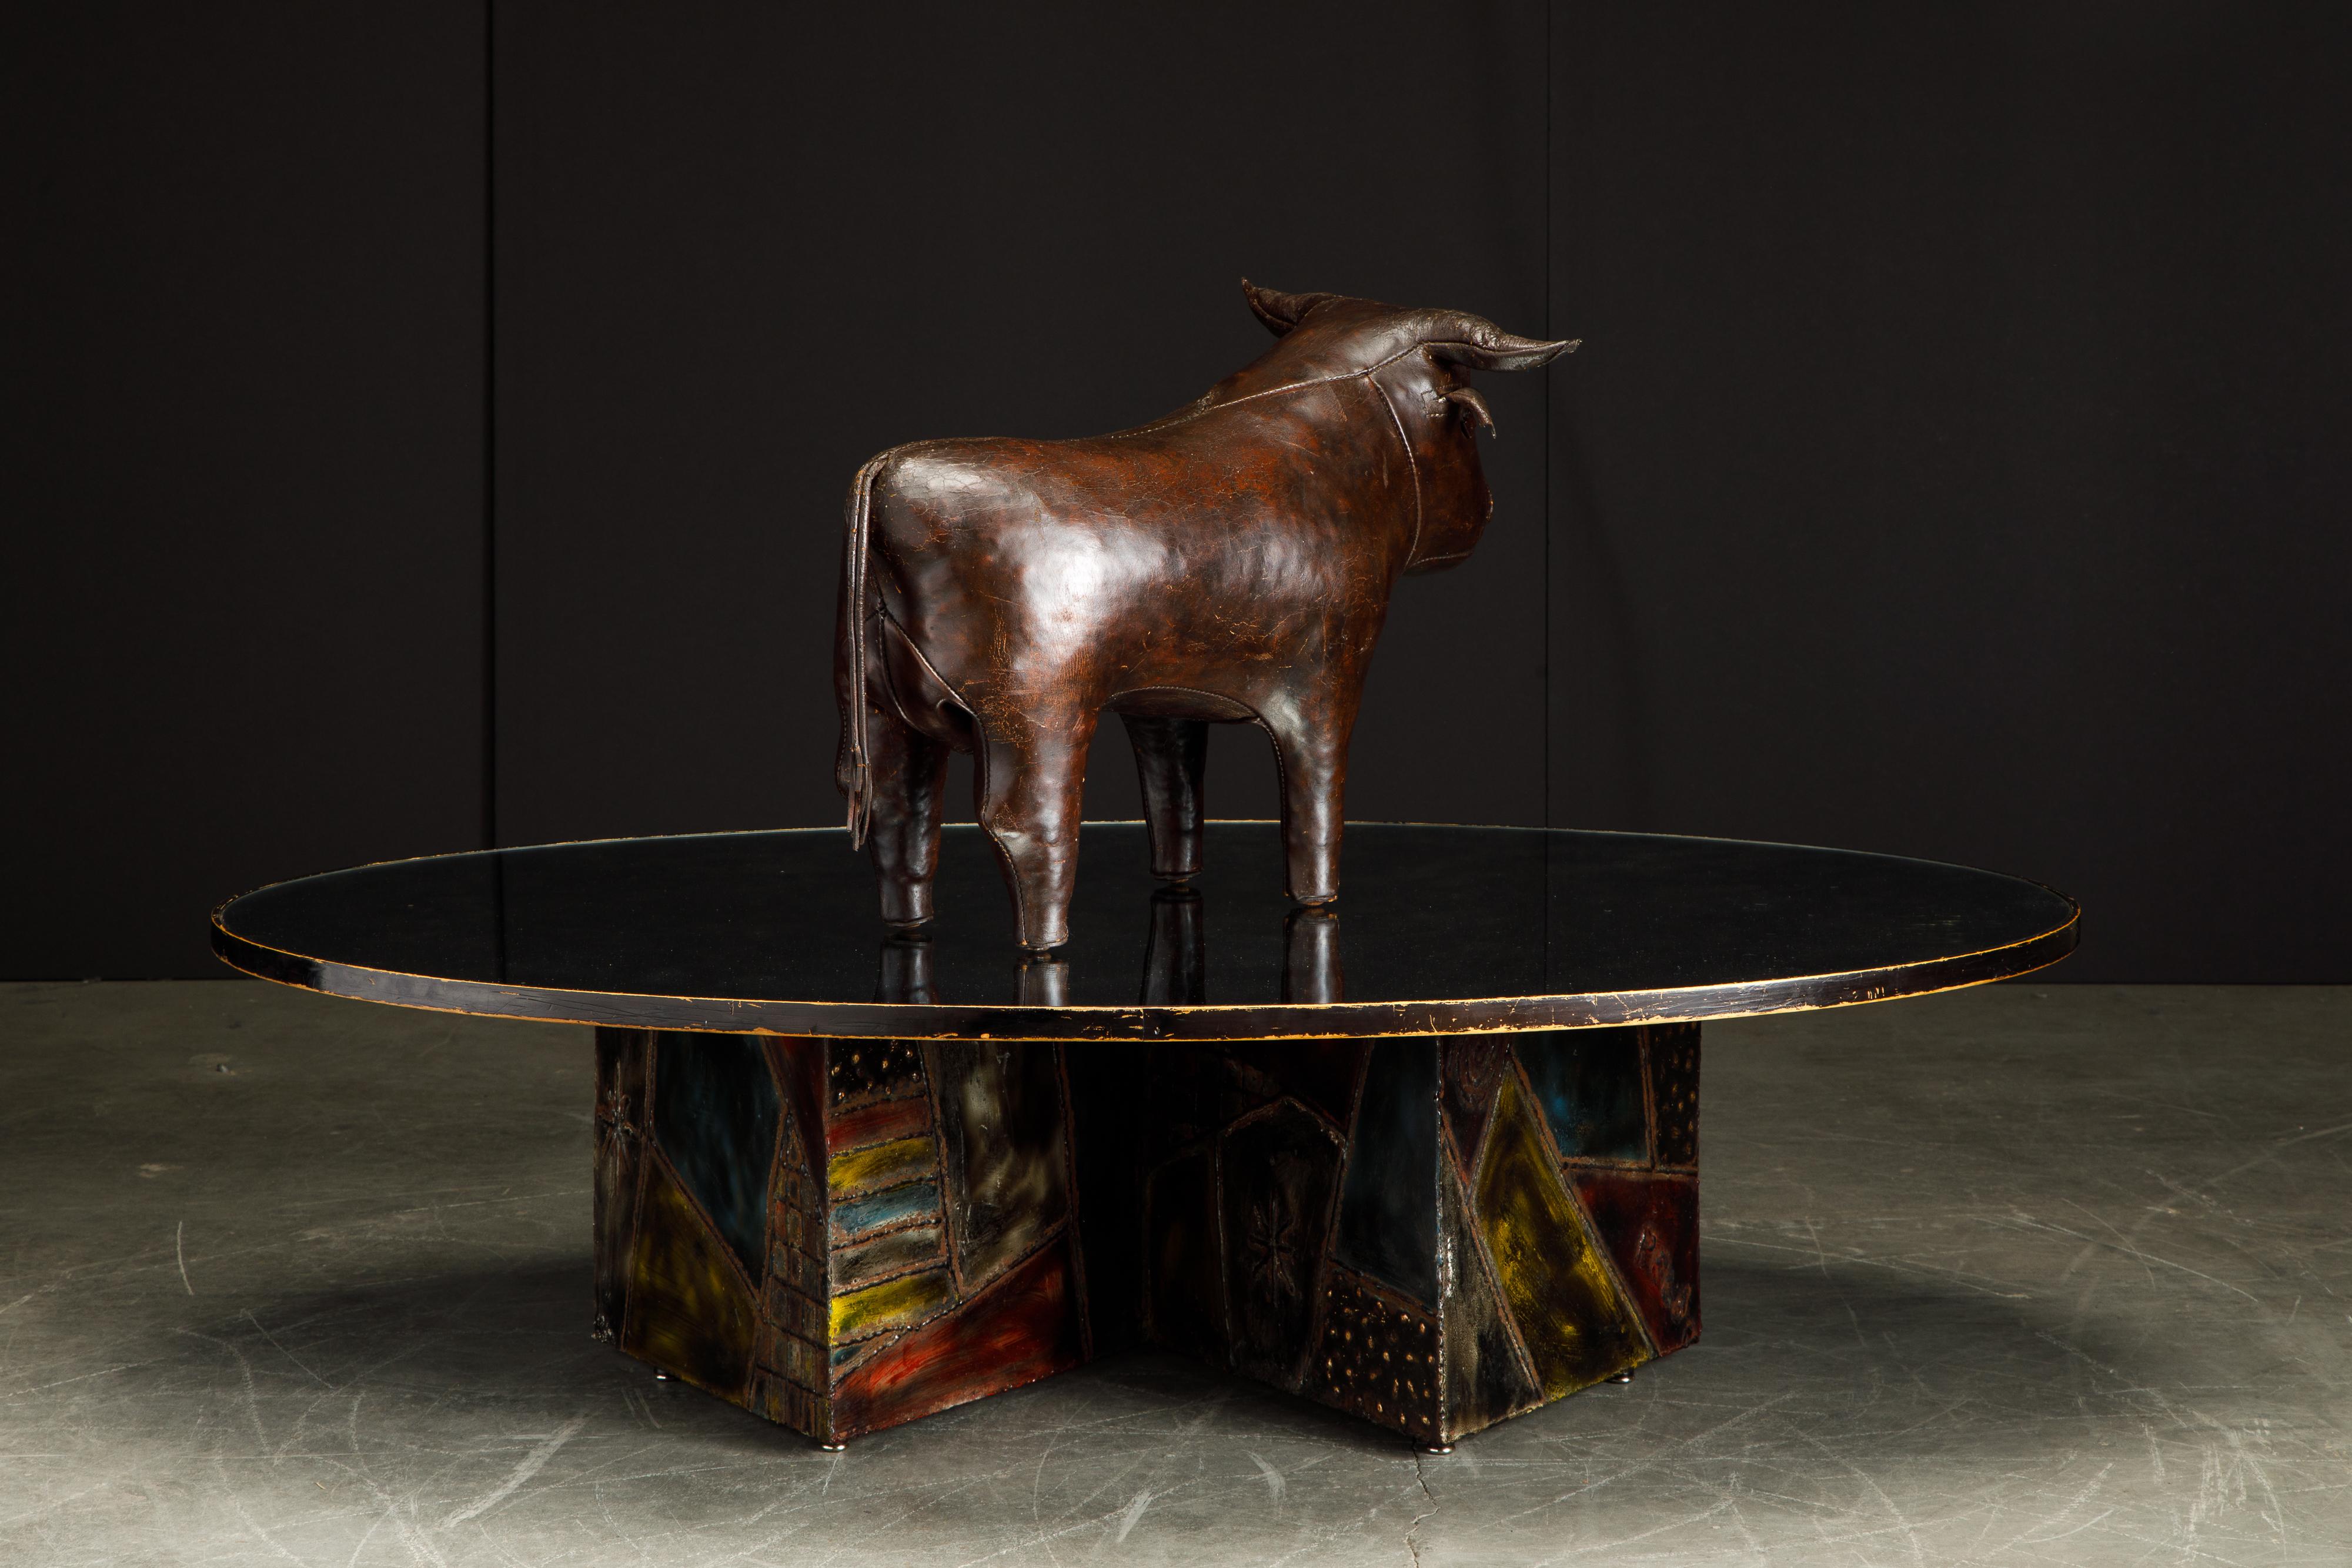 English Leather Bull Footstool by Dimitri Omersa for Abercrombie & Fitch, 1960s, Signed